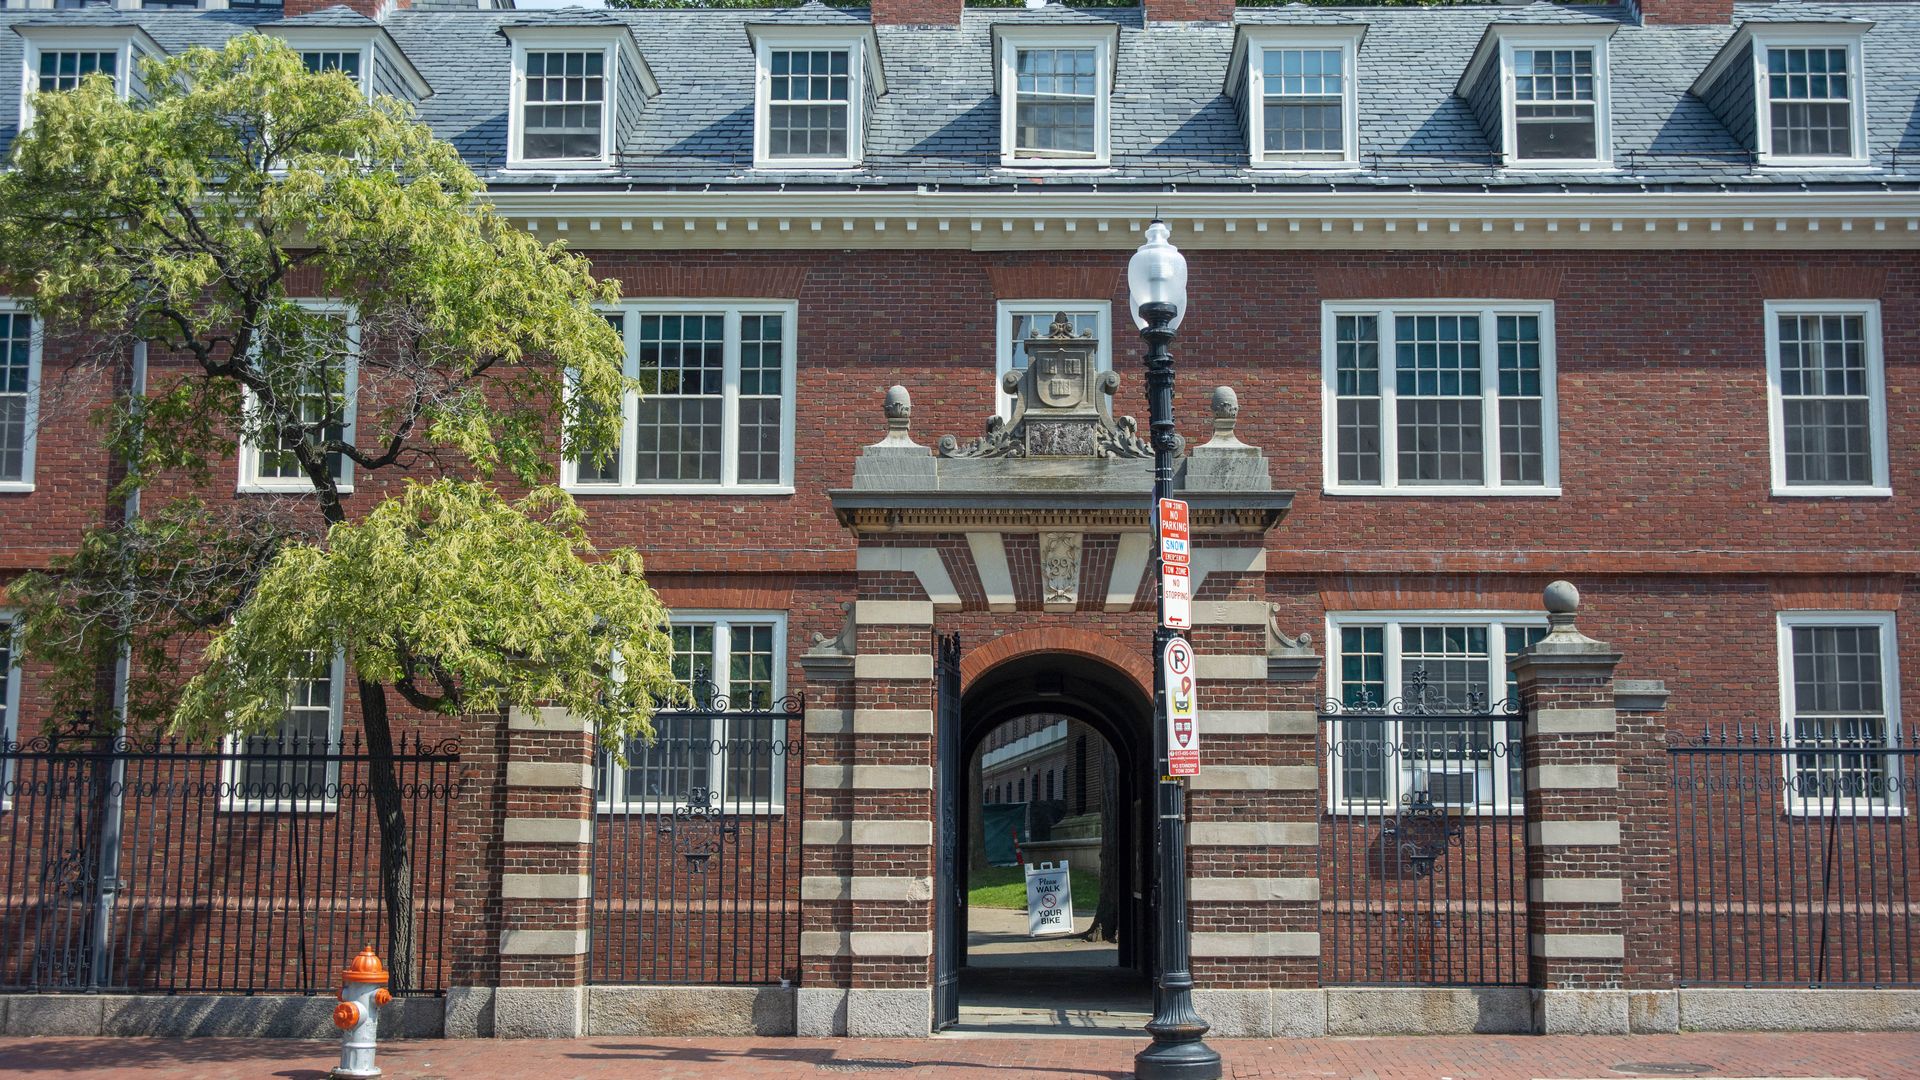 Entrance gate in front of a building at Harvard University 